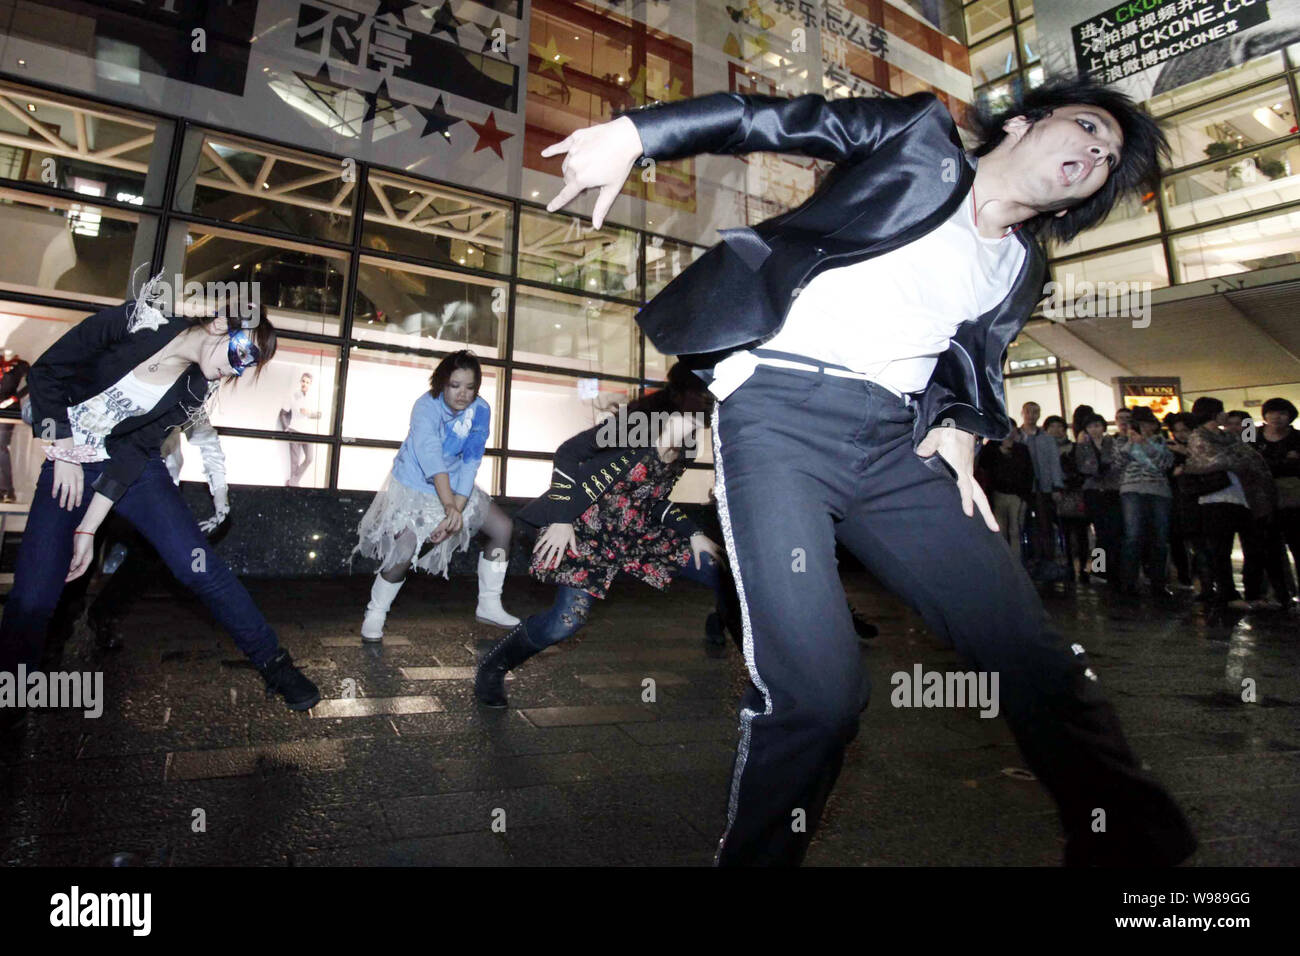 Young Chinese people perform dancing of Michael Jacksons Thriller during a celebration for Halloween at Xintiandi, a tourist attraction complex, in Sh Stock Photo